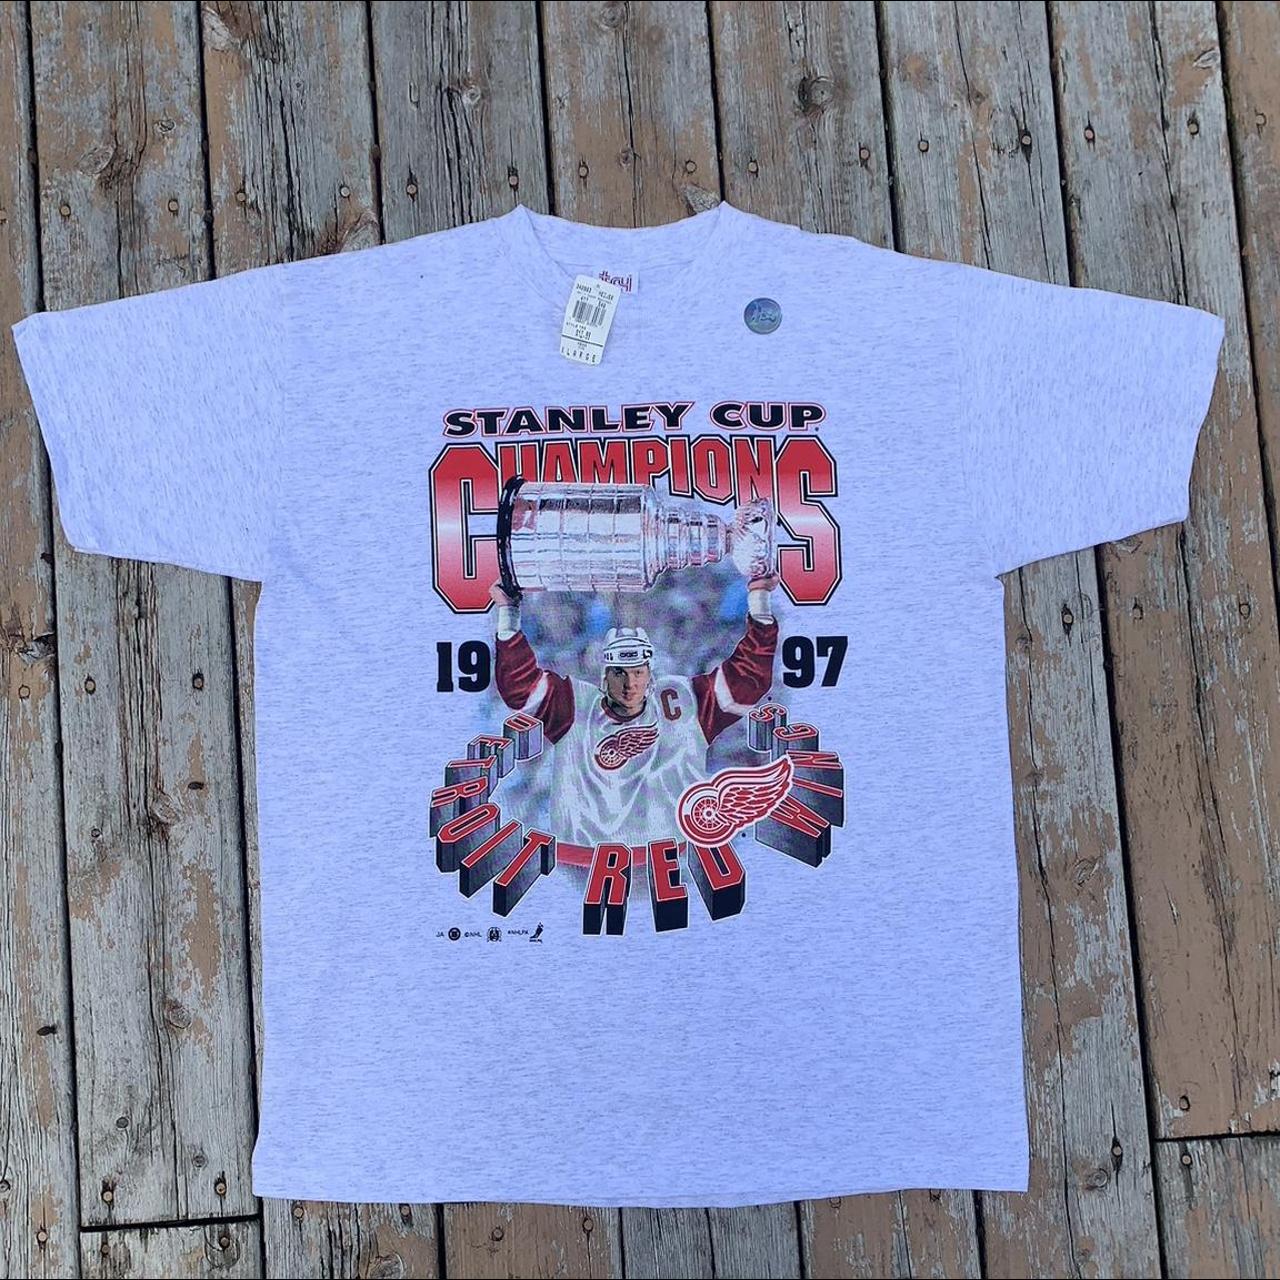 Vintage Detroit Red Wings Stanley Cup Championship Hockey 